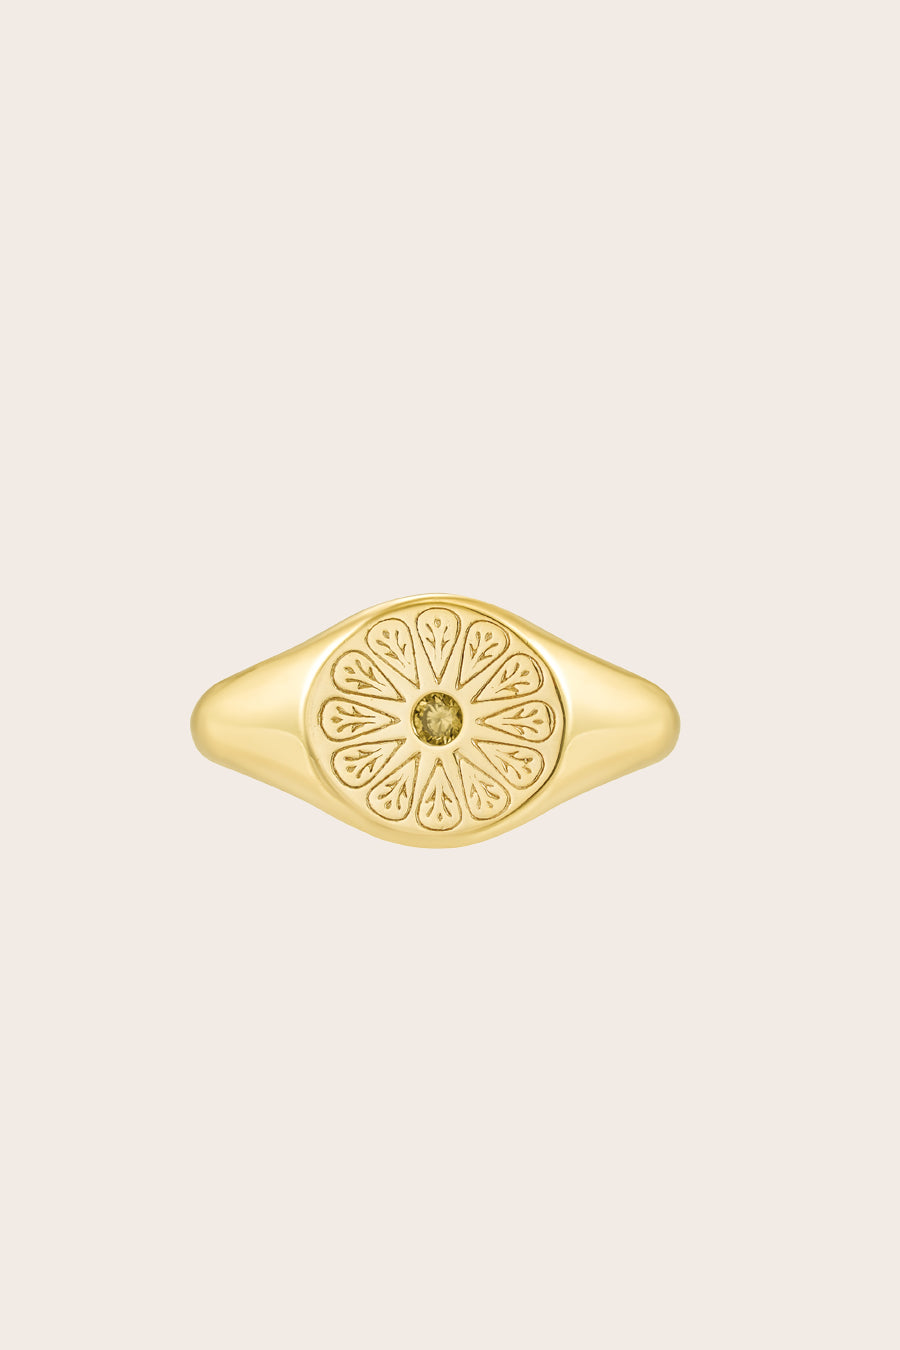 August Peridot Birthstone Signet Ring in gold on cream background